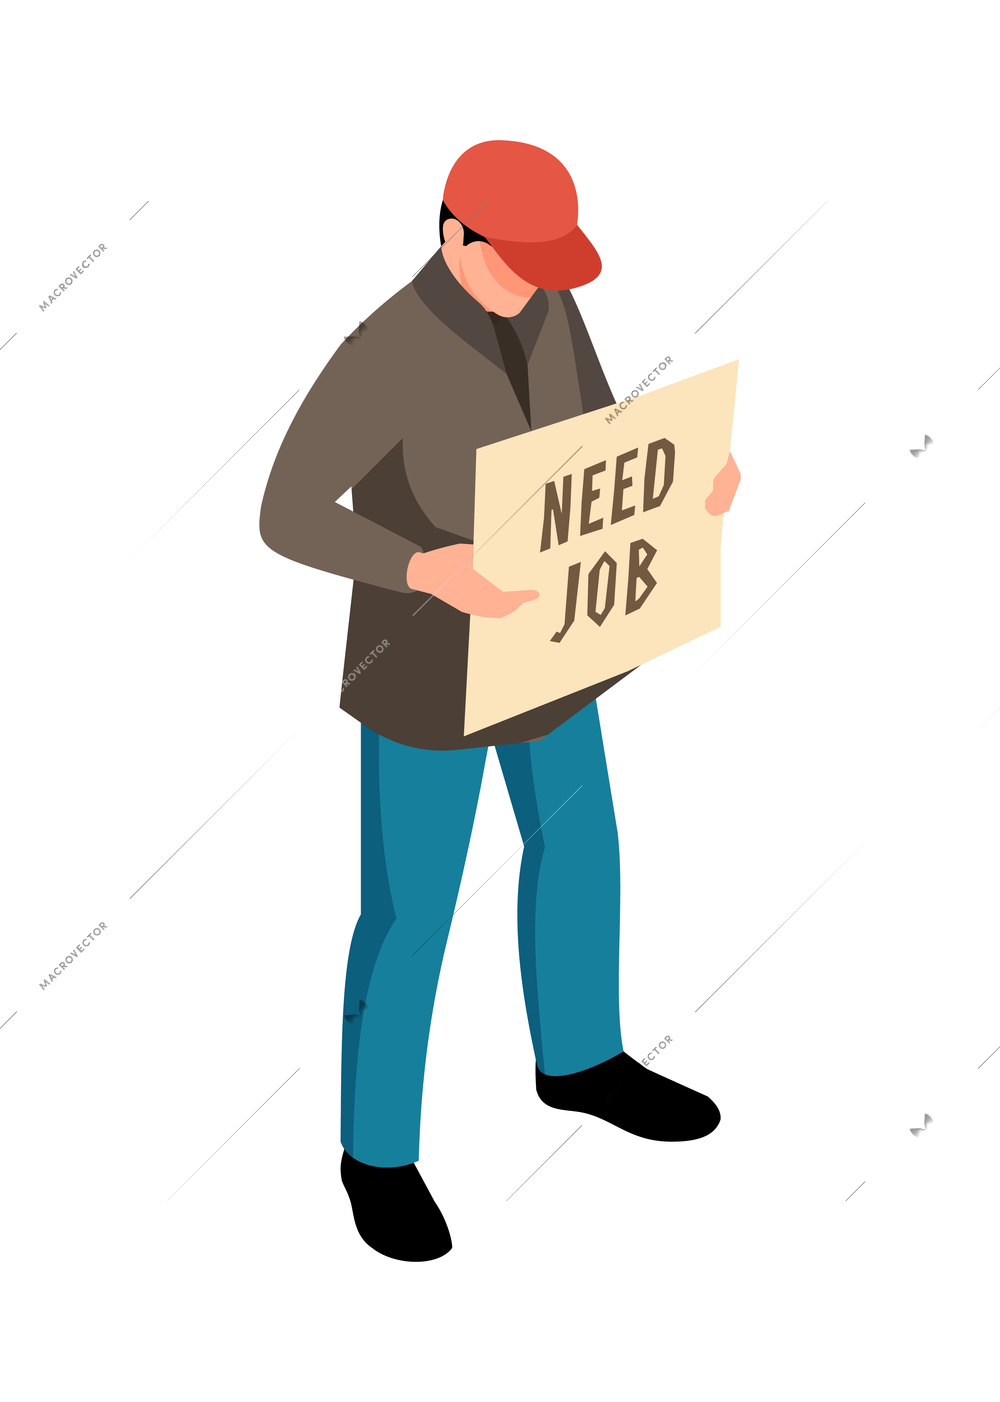 Isometric icon with jobless man holding placard need job 3d vector illustration